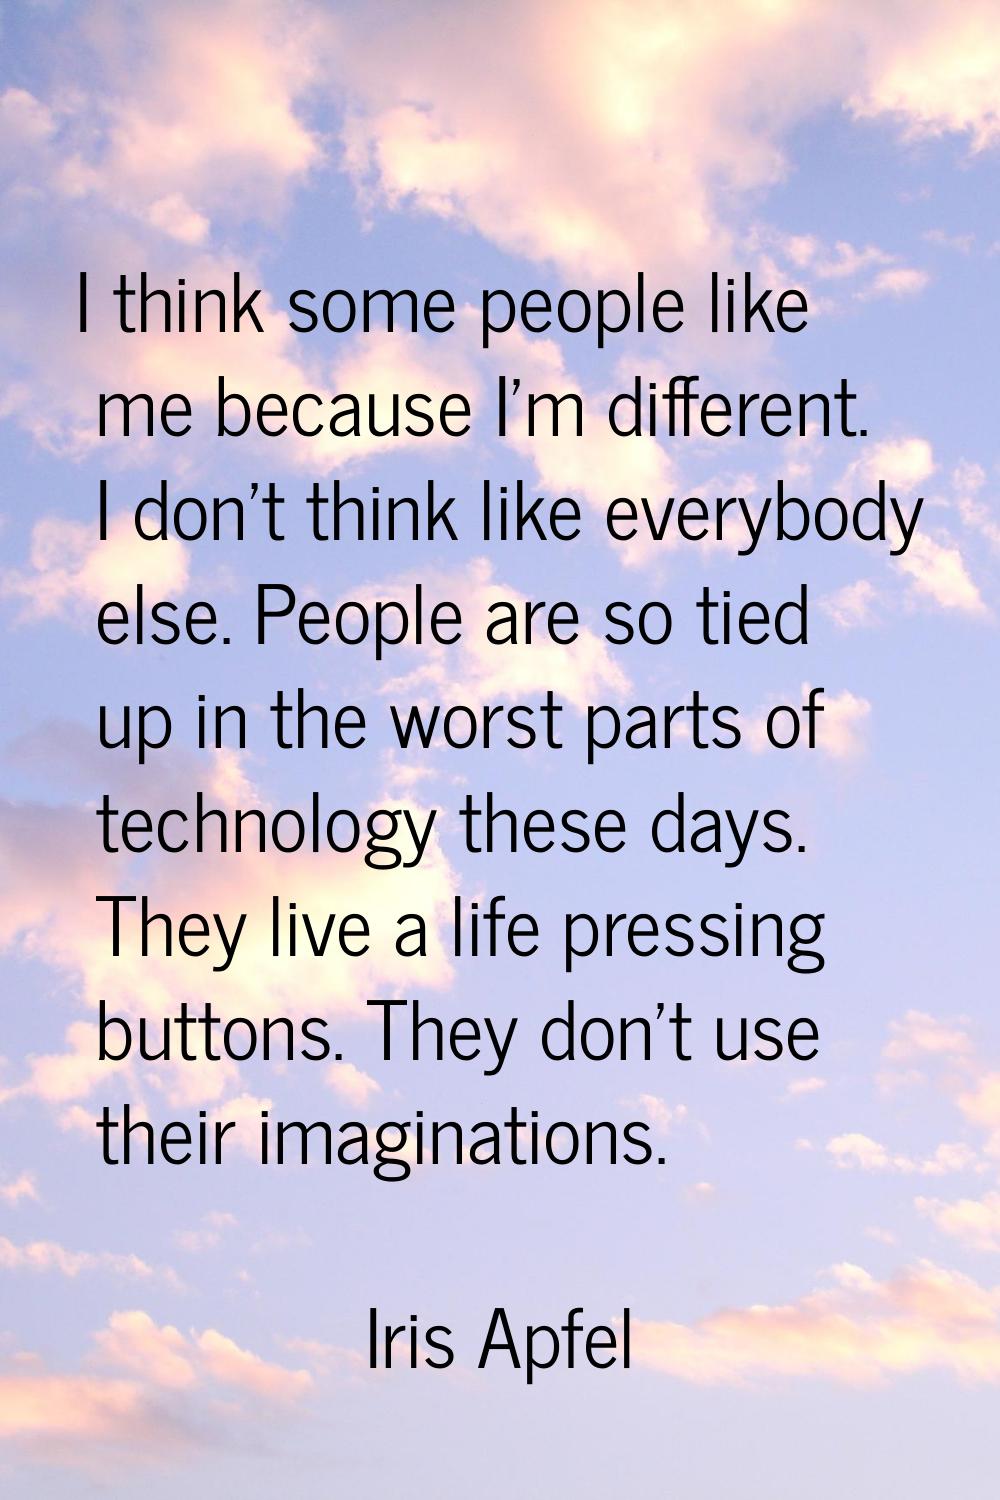 I think some people like me because I'm different. I don't think like everybody else. People are so